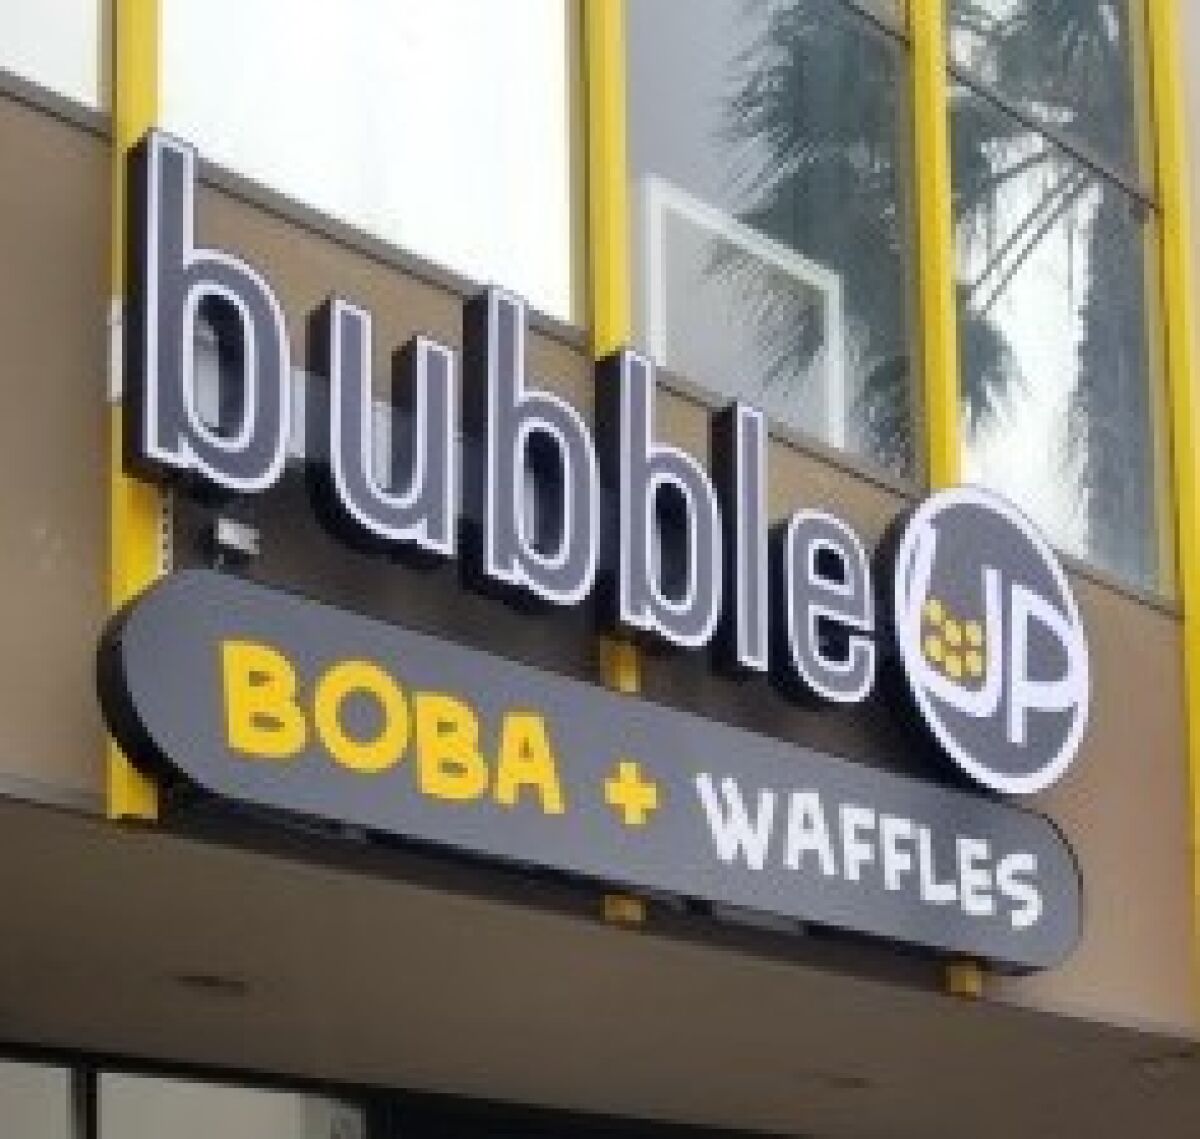 Bubble Up Boba + Waffles is coming to Garnet Avenue in Pacific Beach.